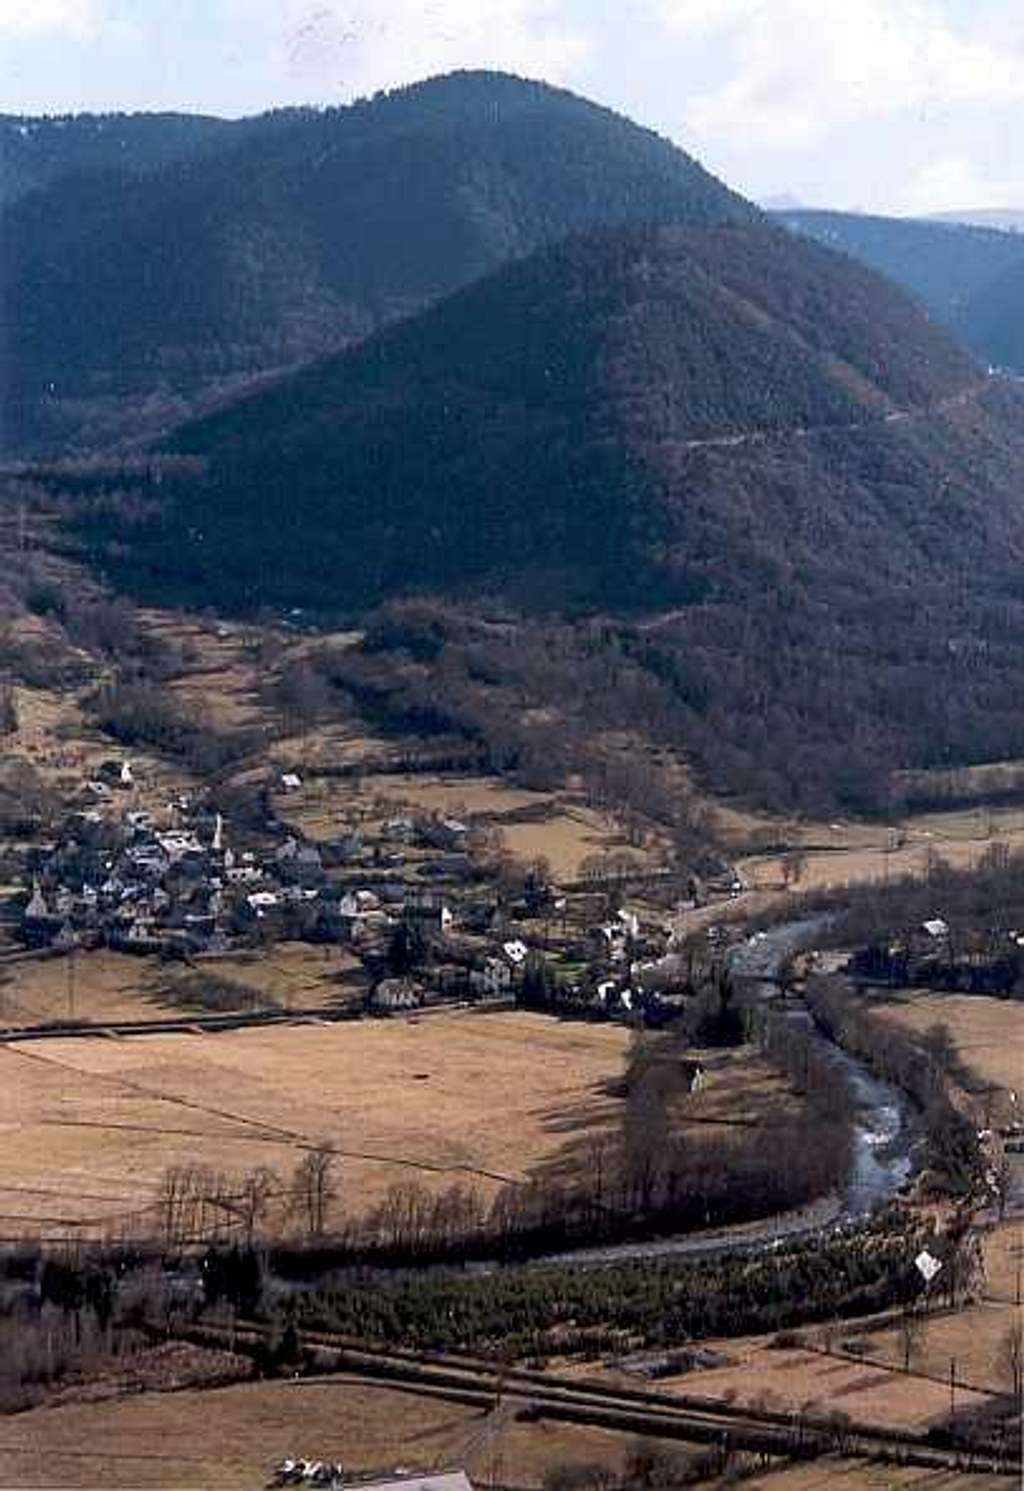 The Aure valley